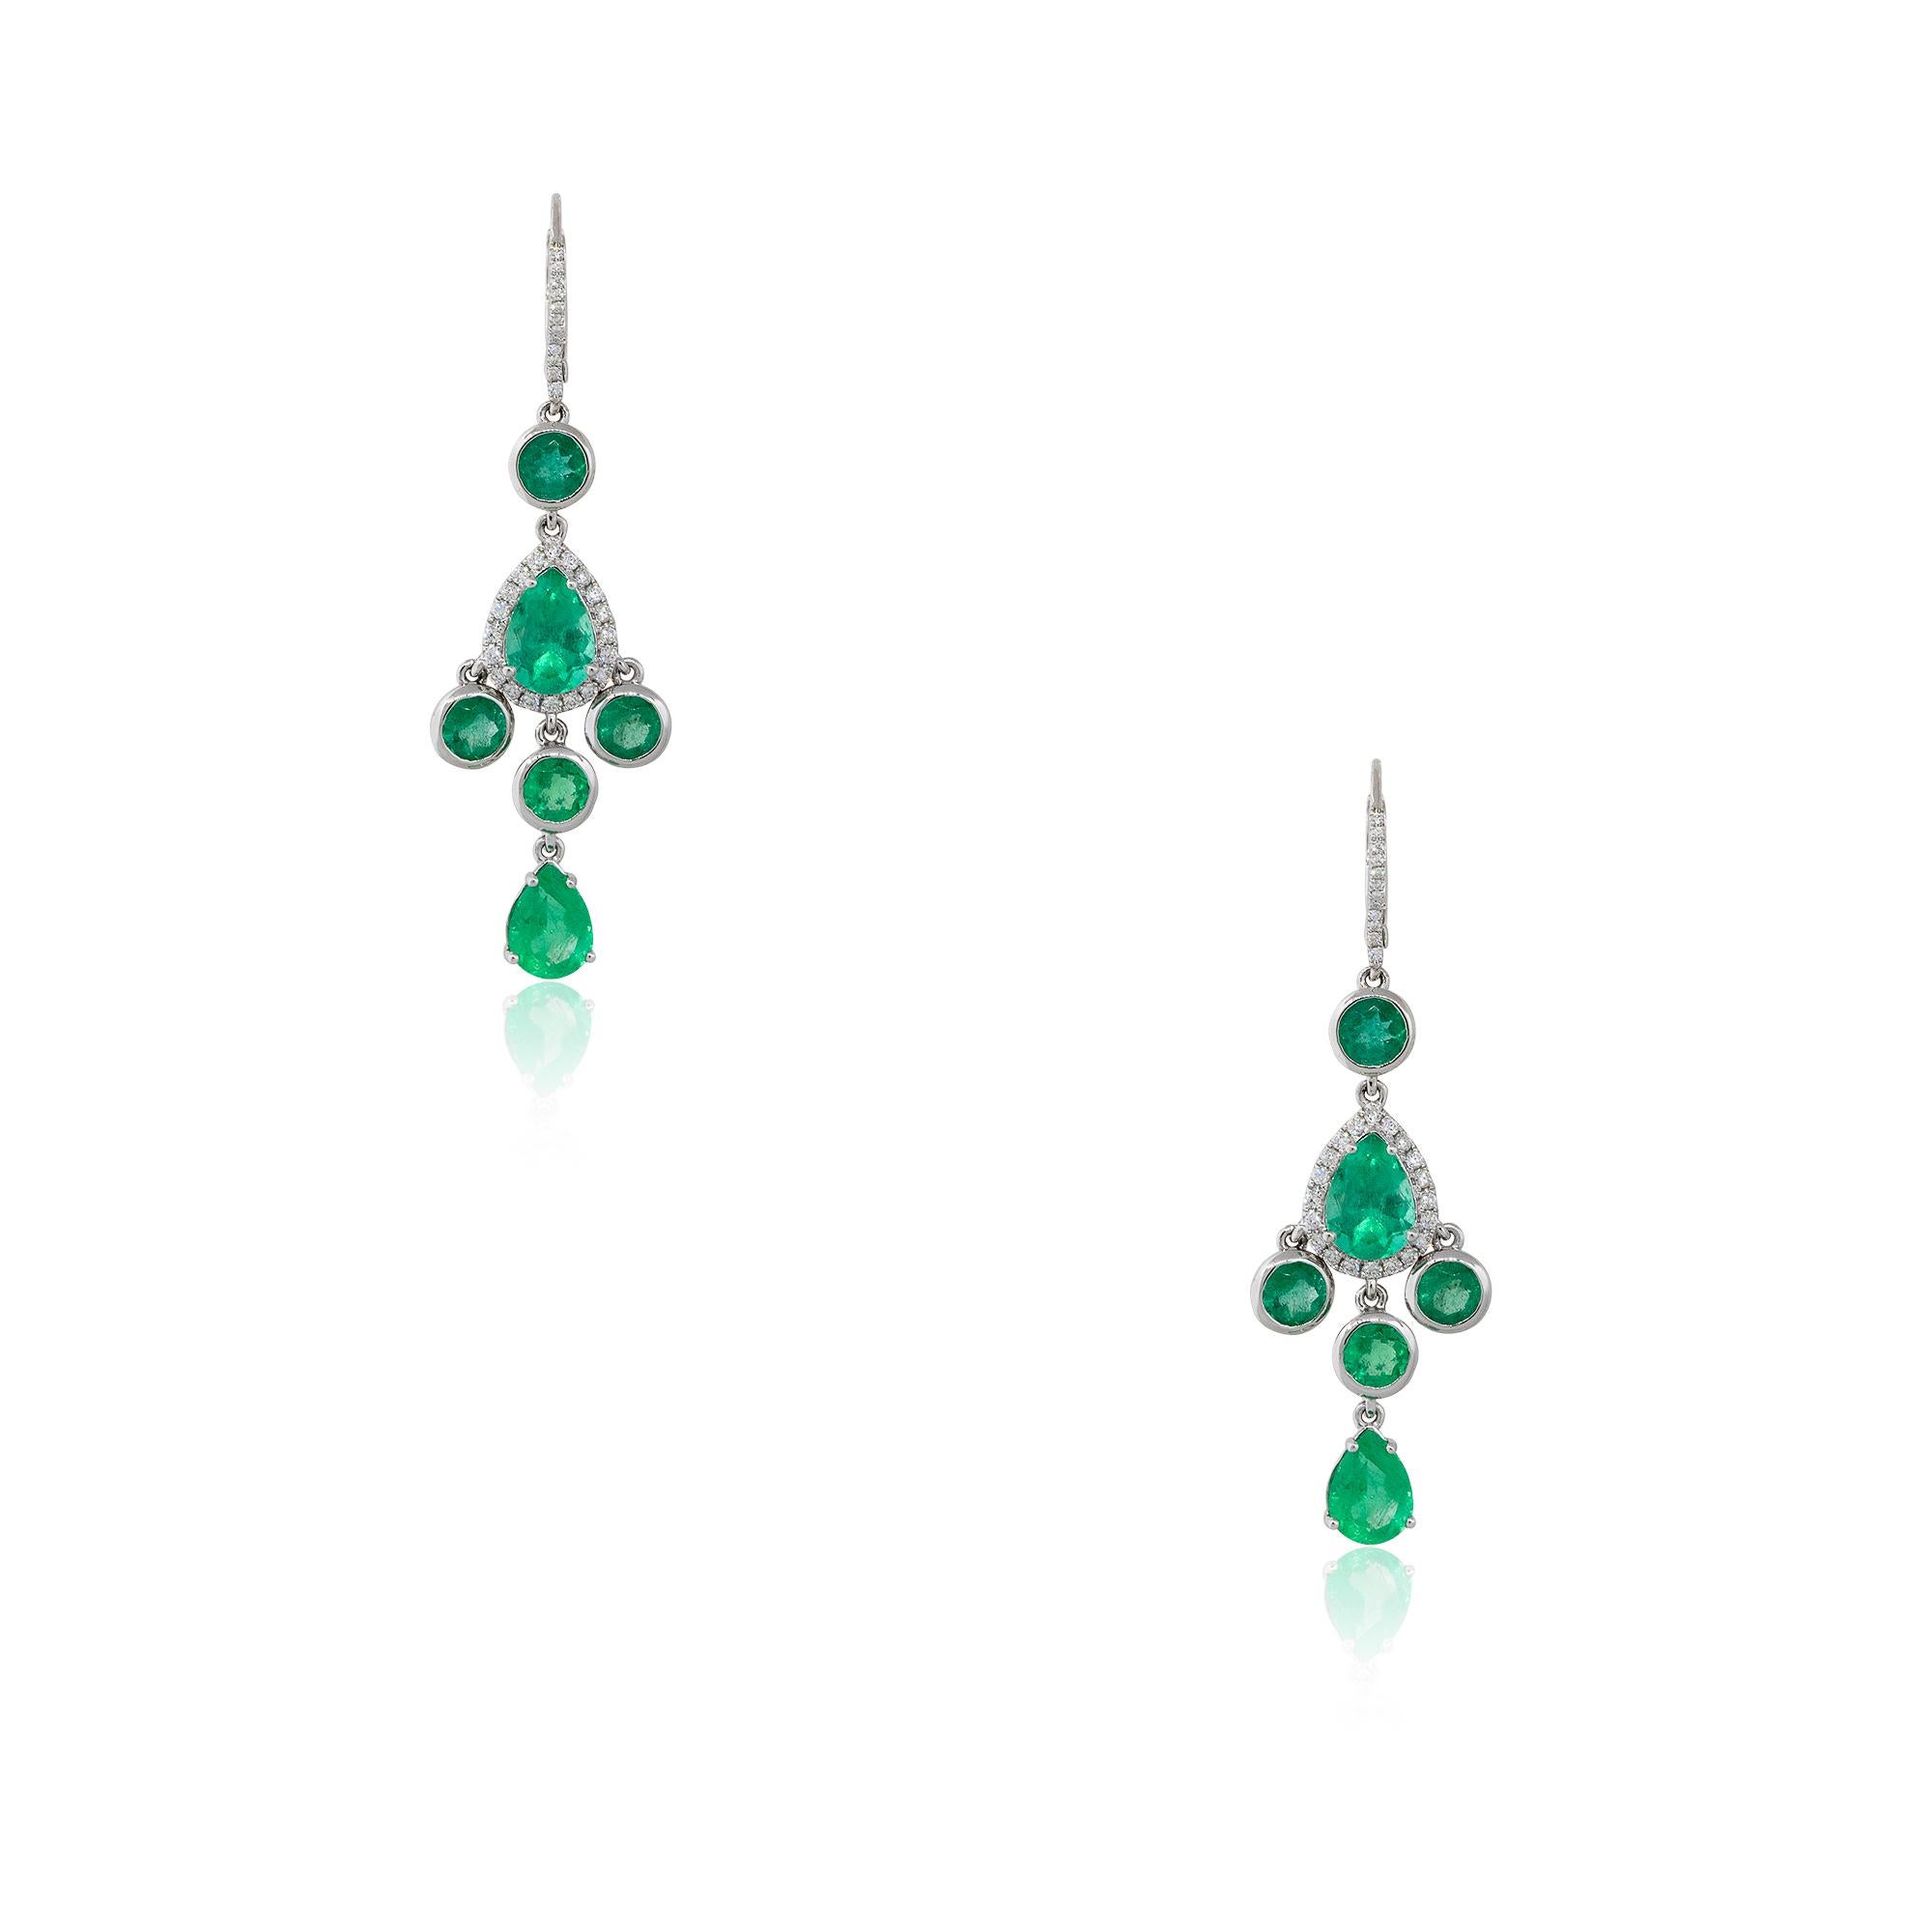 18k White Gold 7.56ctw Emerald and Diamond Halo Drop Earrings

Material: 18k White Gold
Gemstone Details: Approximately 7.56ctw of Pear shaped and Round cut Emeralds. There are 12 Emeralds total
Diamond Details: Approximately 0.39ctw of Round